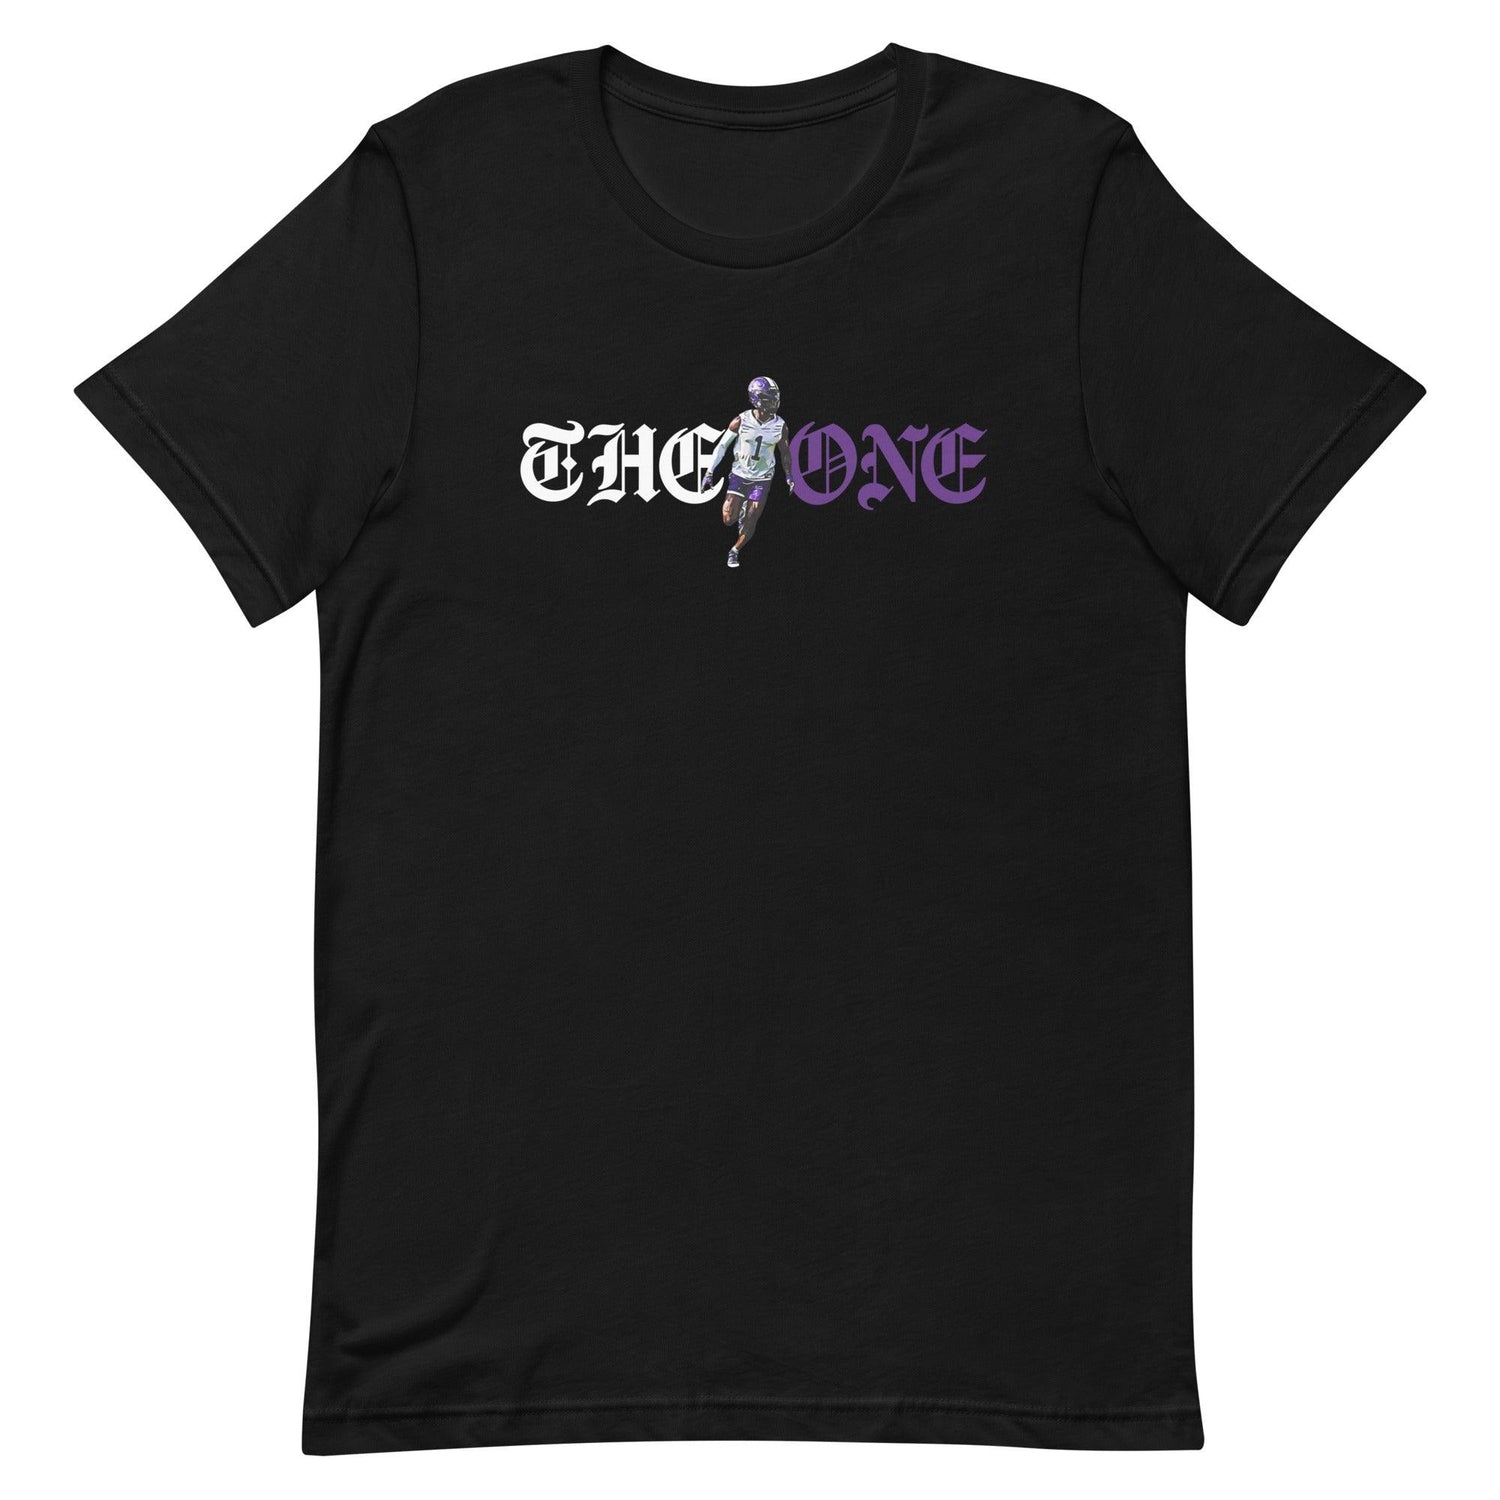 Tre Tomlinson “the one” t-shirt - Fan Arch